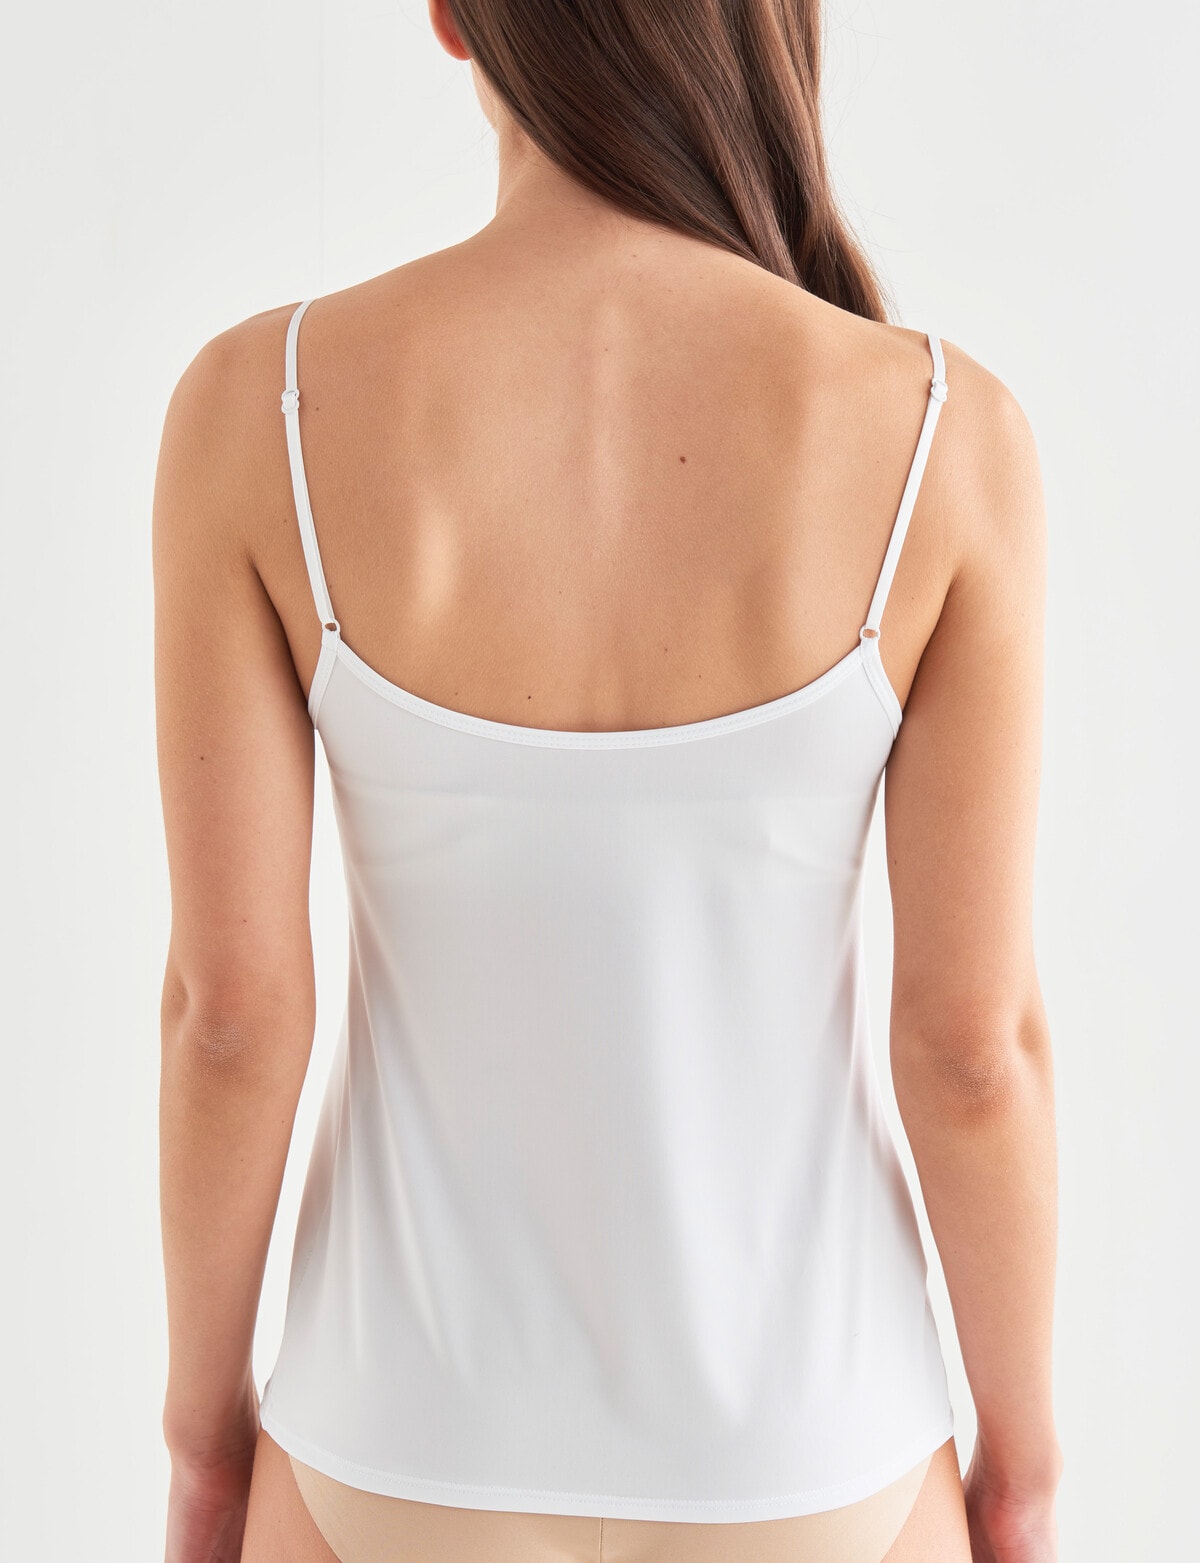 Kmart shopper turns $2 cowl neck cami top into chic crop top in just  seconds